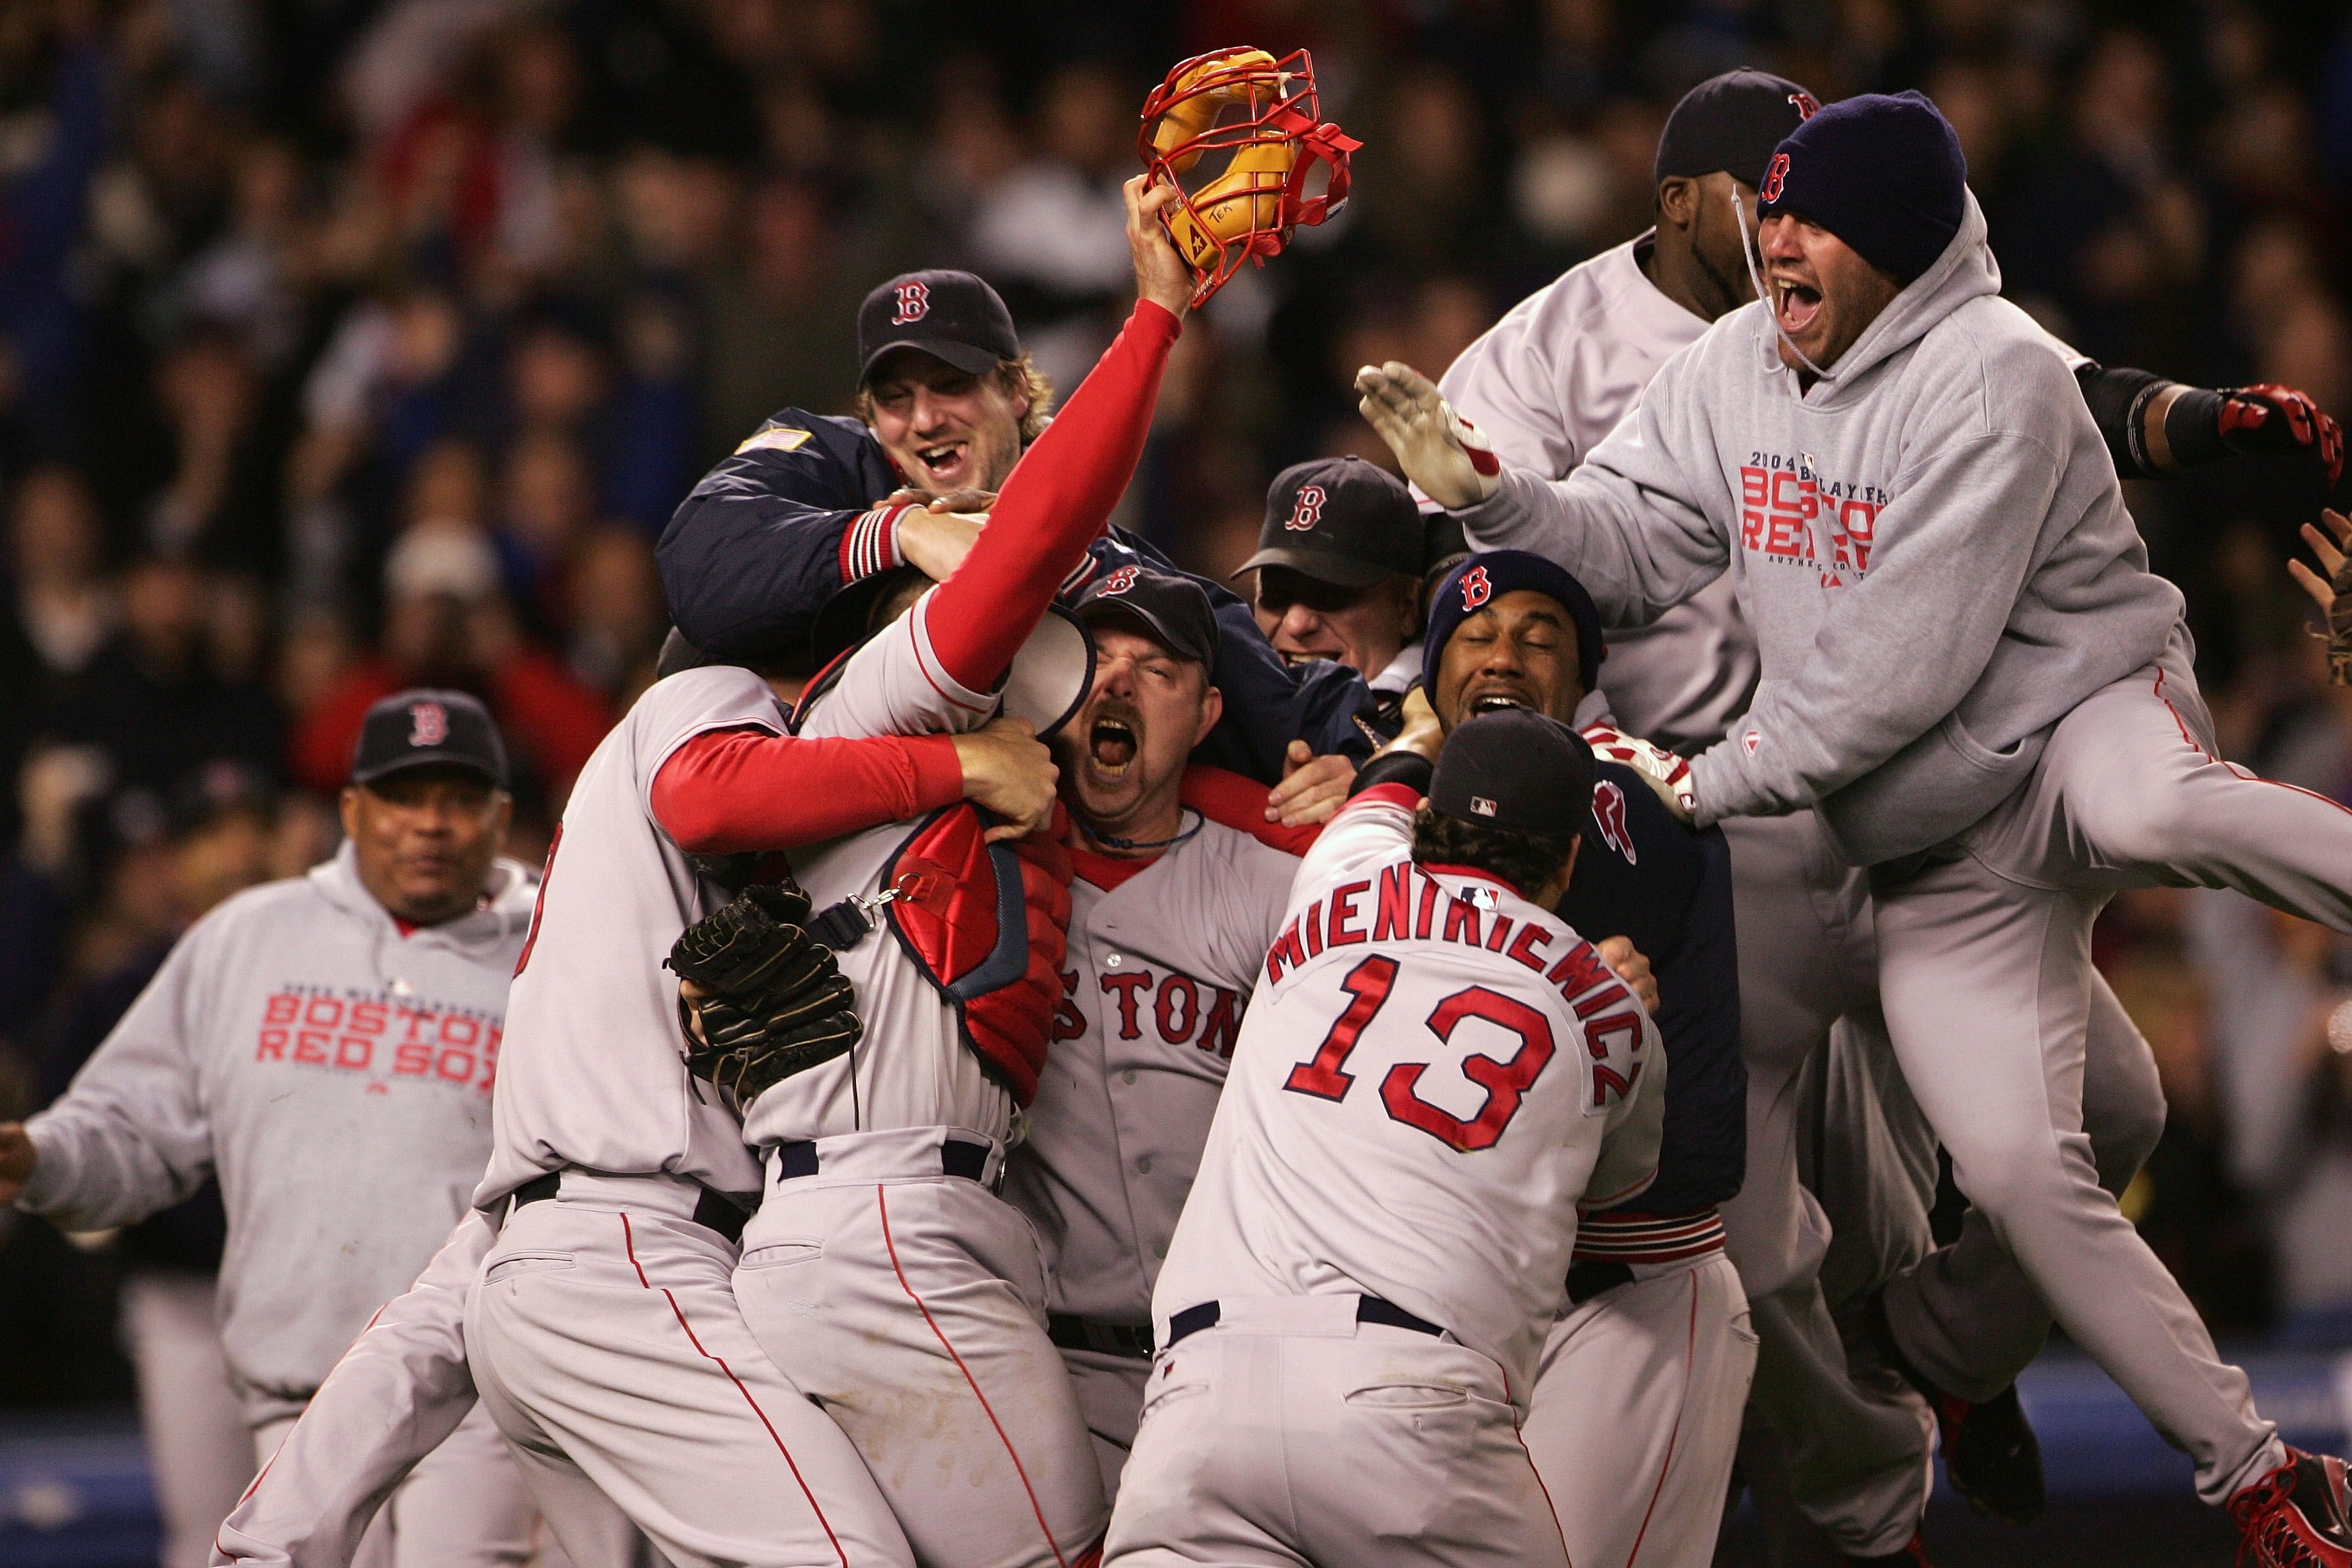 The Boston Red Sox 2004 World Series